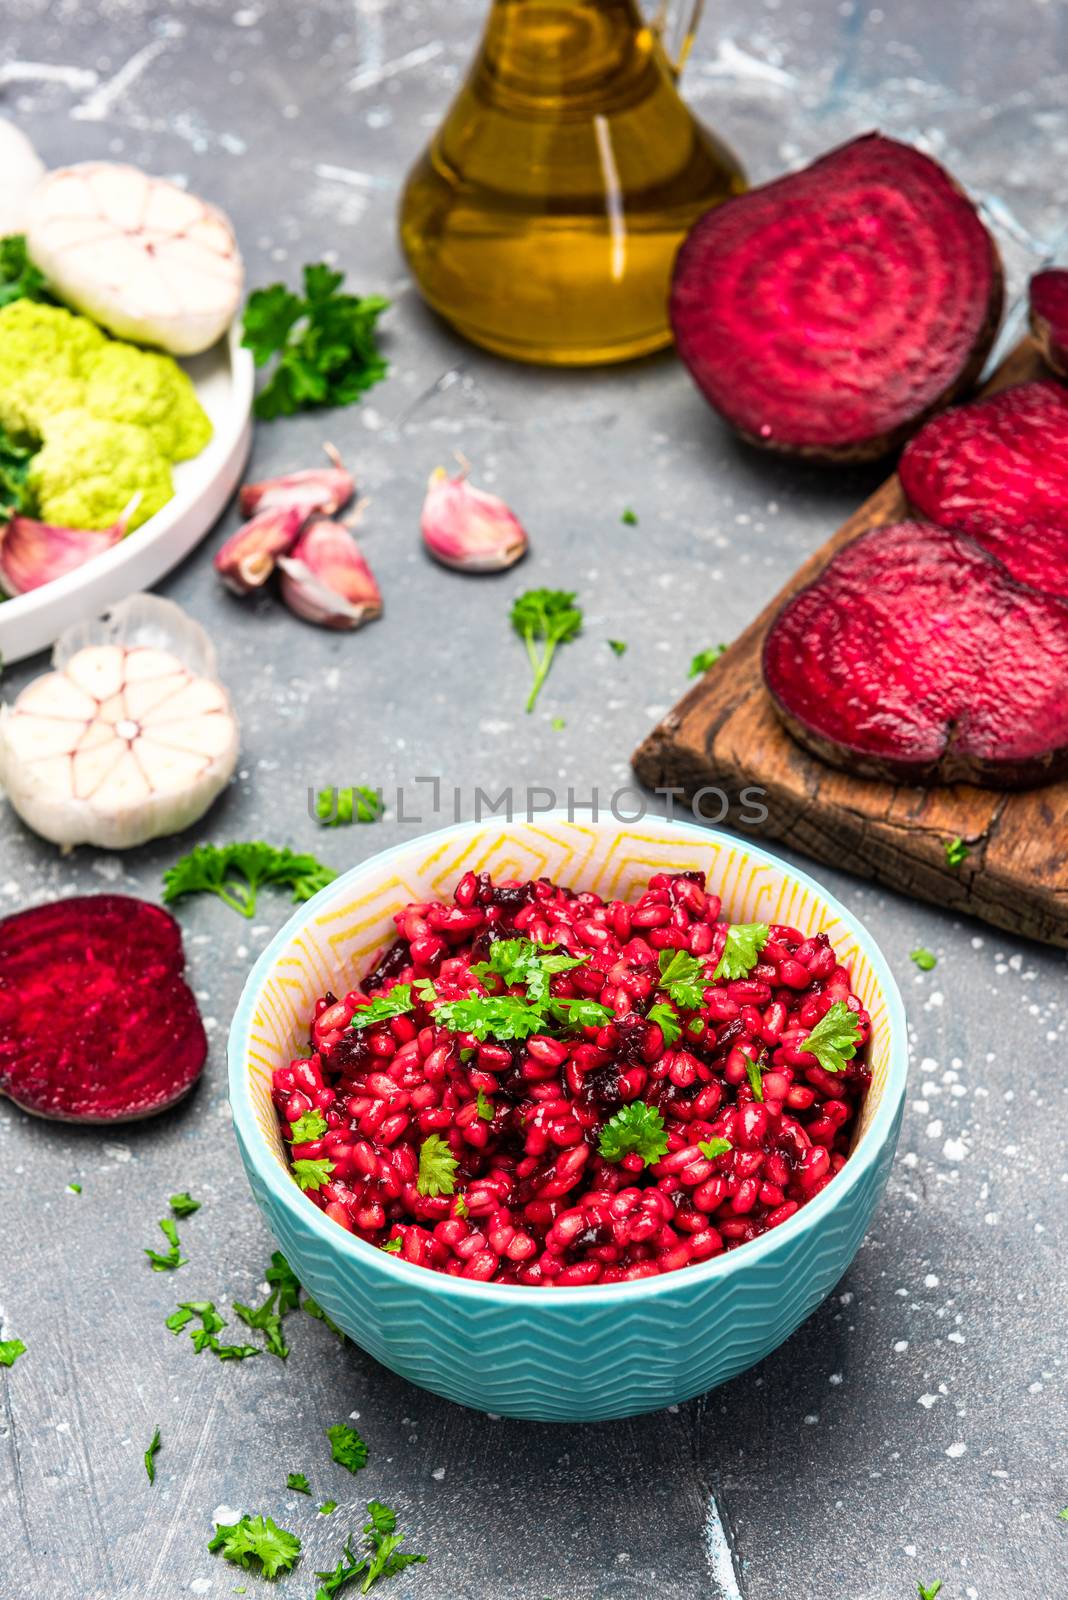 Cooking Vegetarian Plant Based Food. Buckwheat Groats with Beetroot and Parsley.